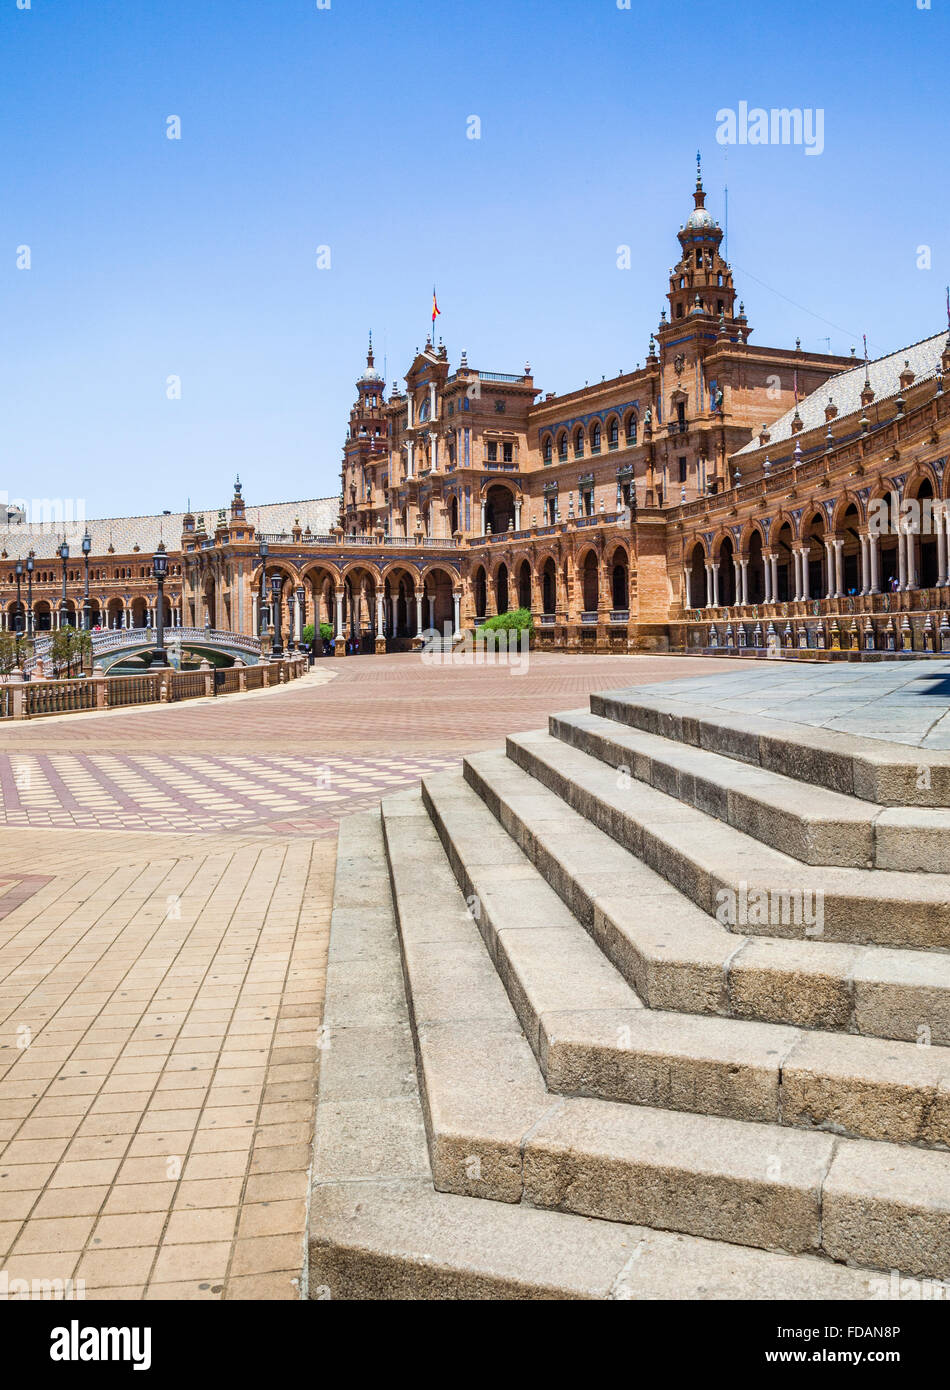 Spain, Andalusia, Province of Seville, Seville, Plaza de Espana, central building of the Ibero-America Exposition of 1929 Stock Photo